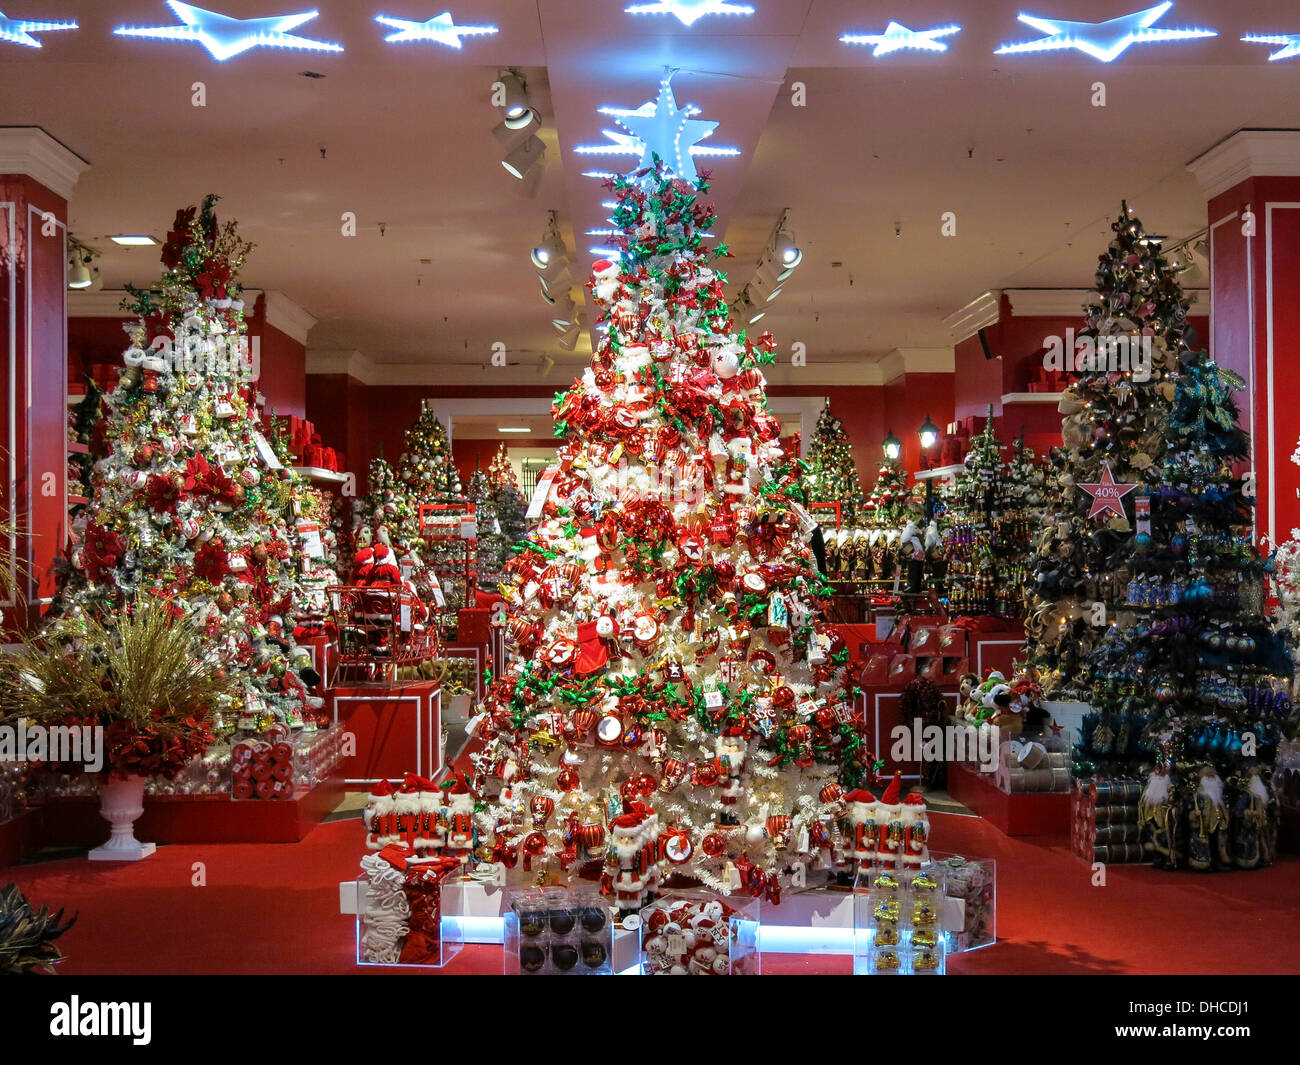 Macy&#39;s Flagship Department Store, Christmas Displays, NYC Stock Photo, Royalty Free Image ...